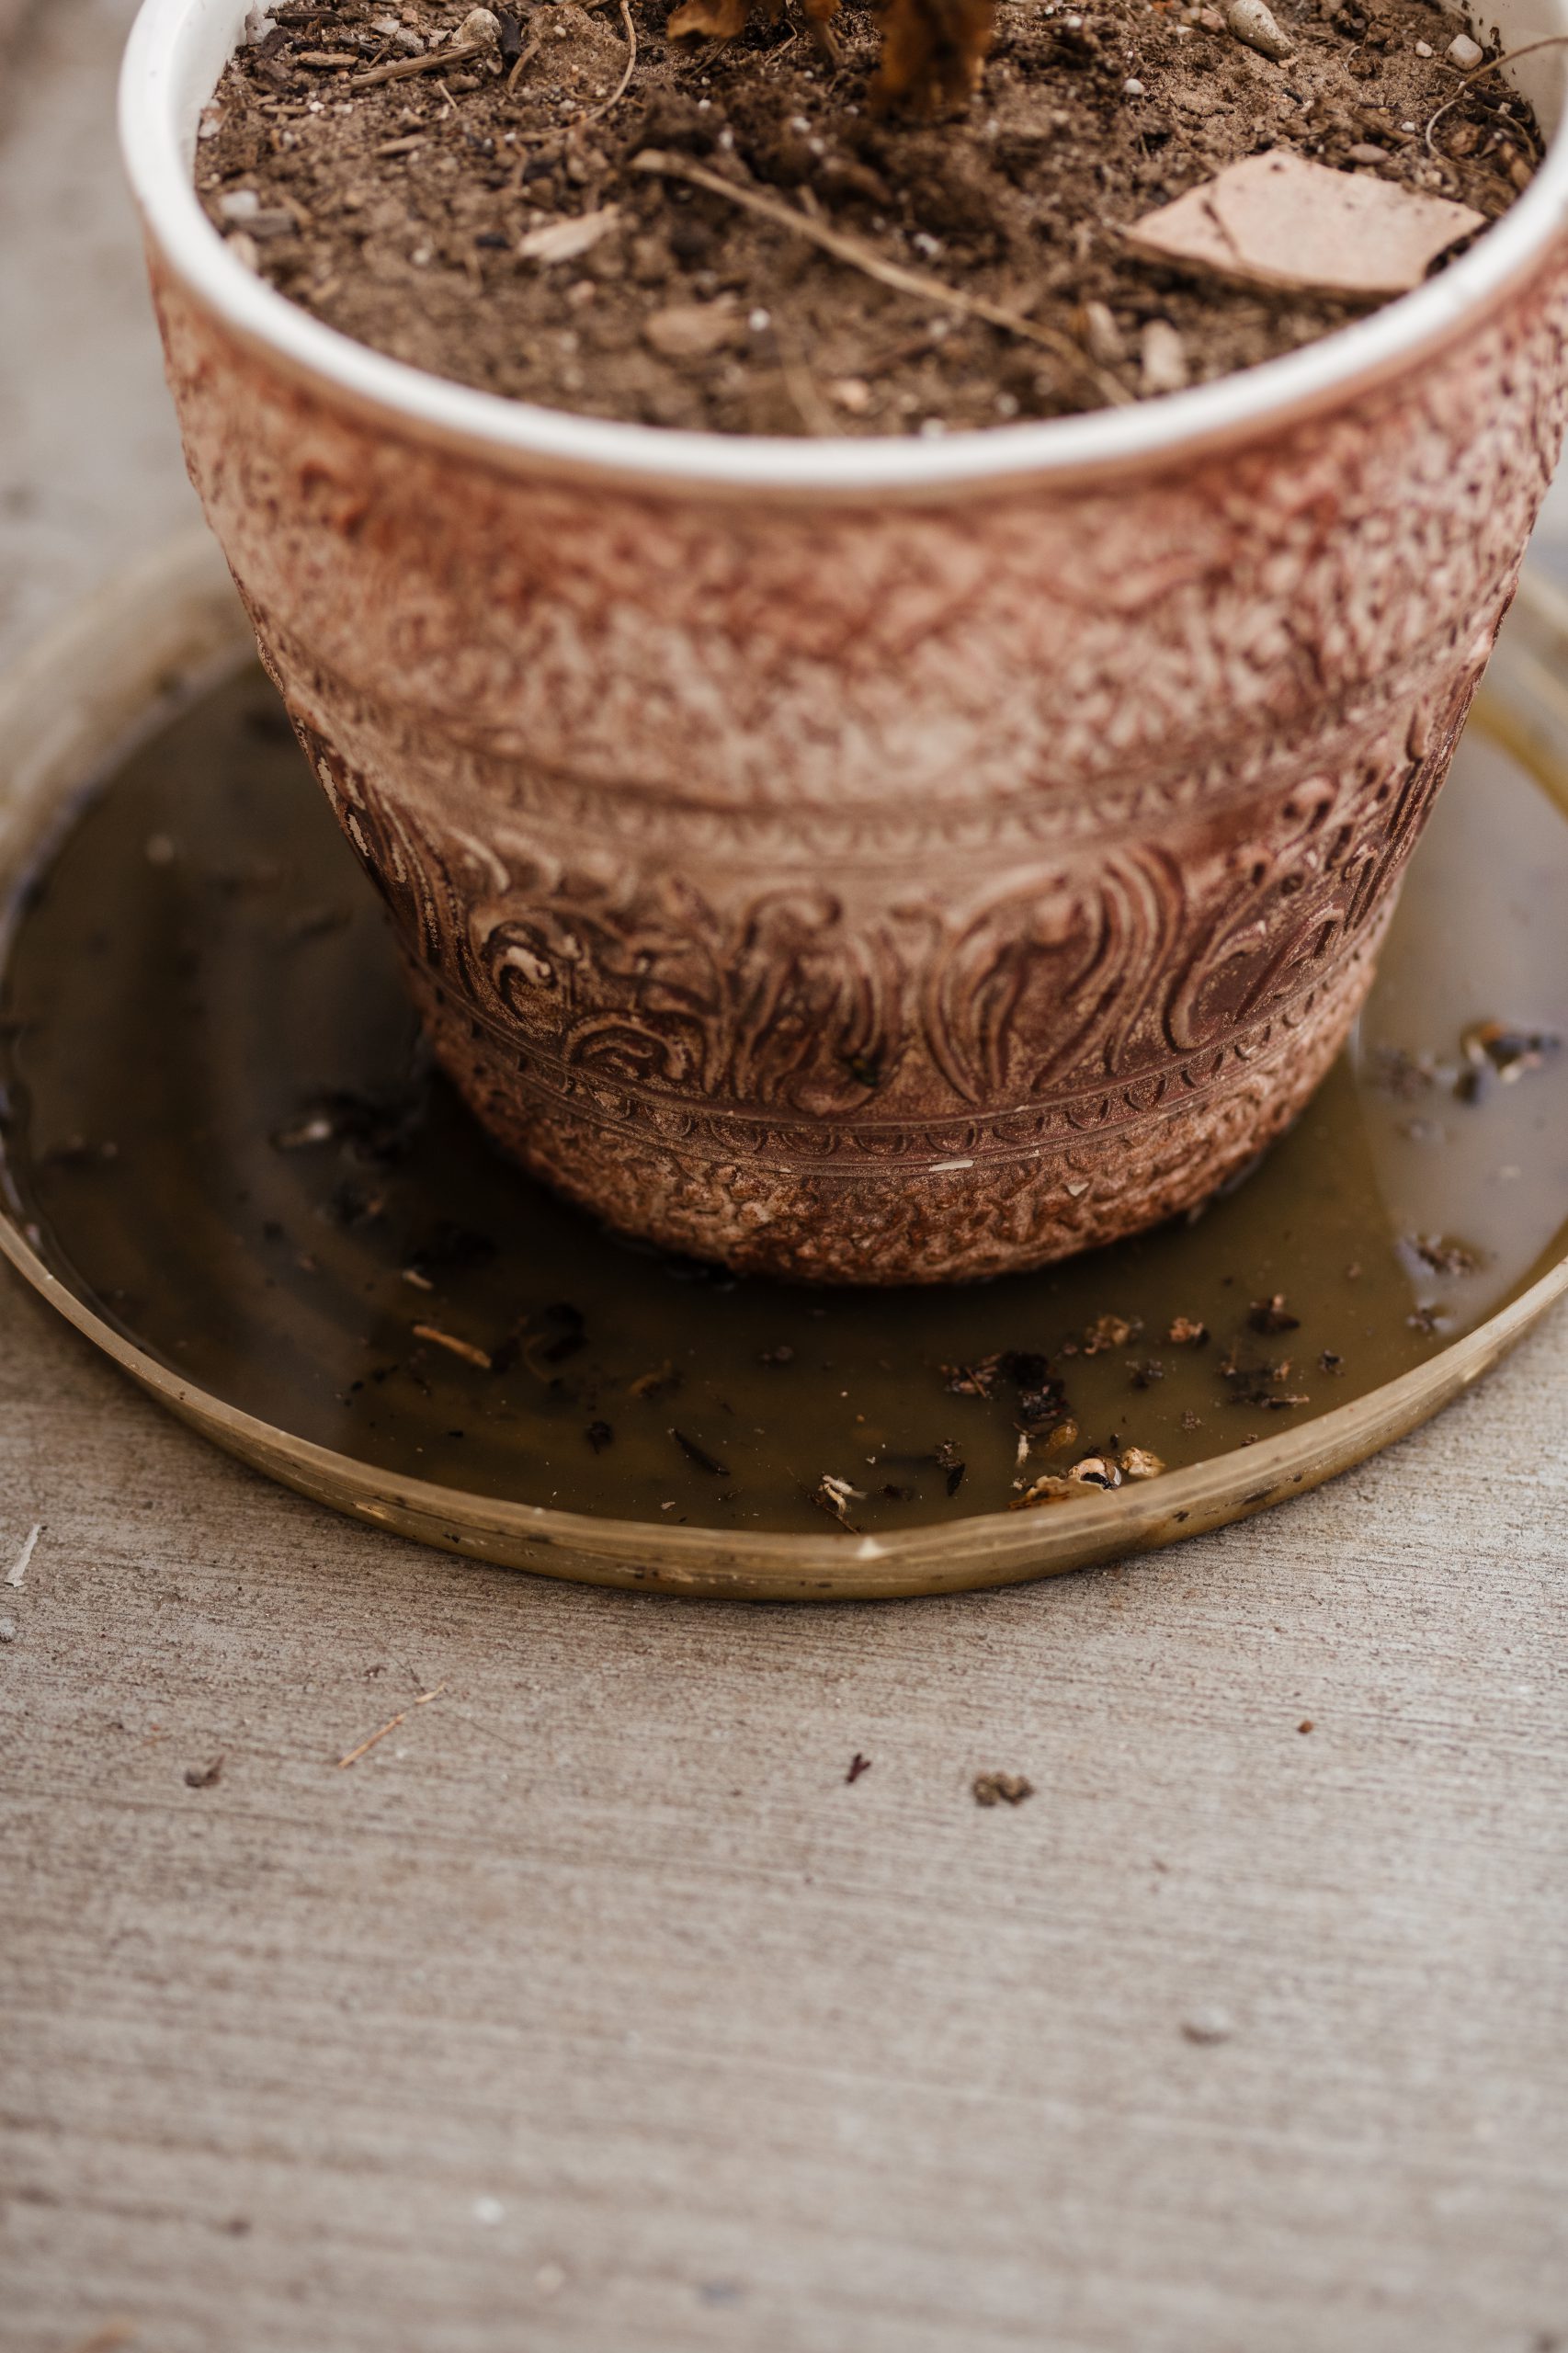 A pot saucer filled with standing water